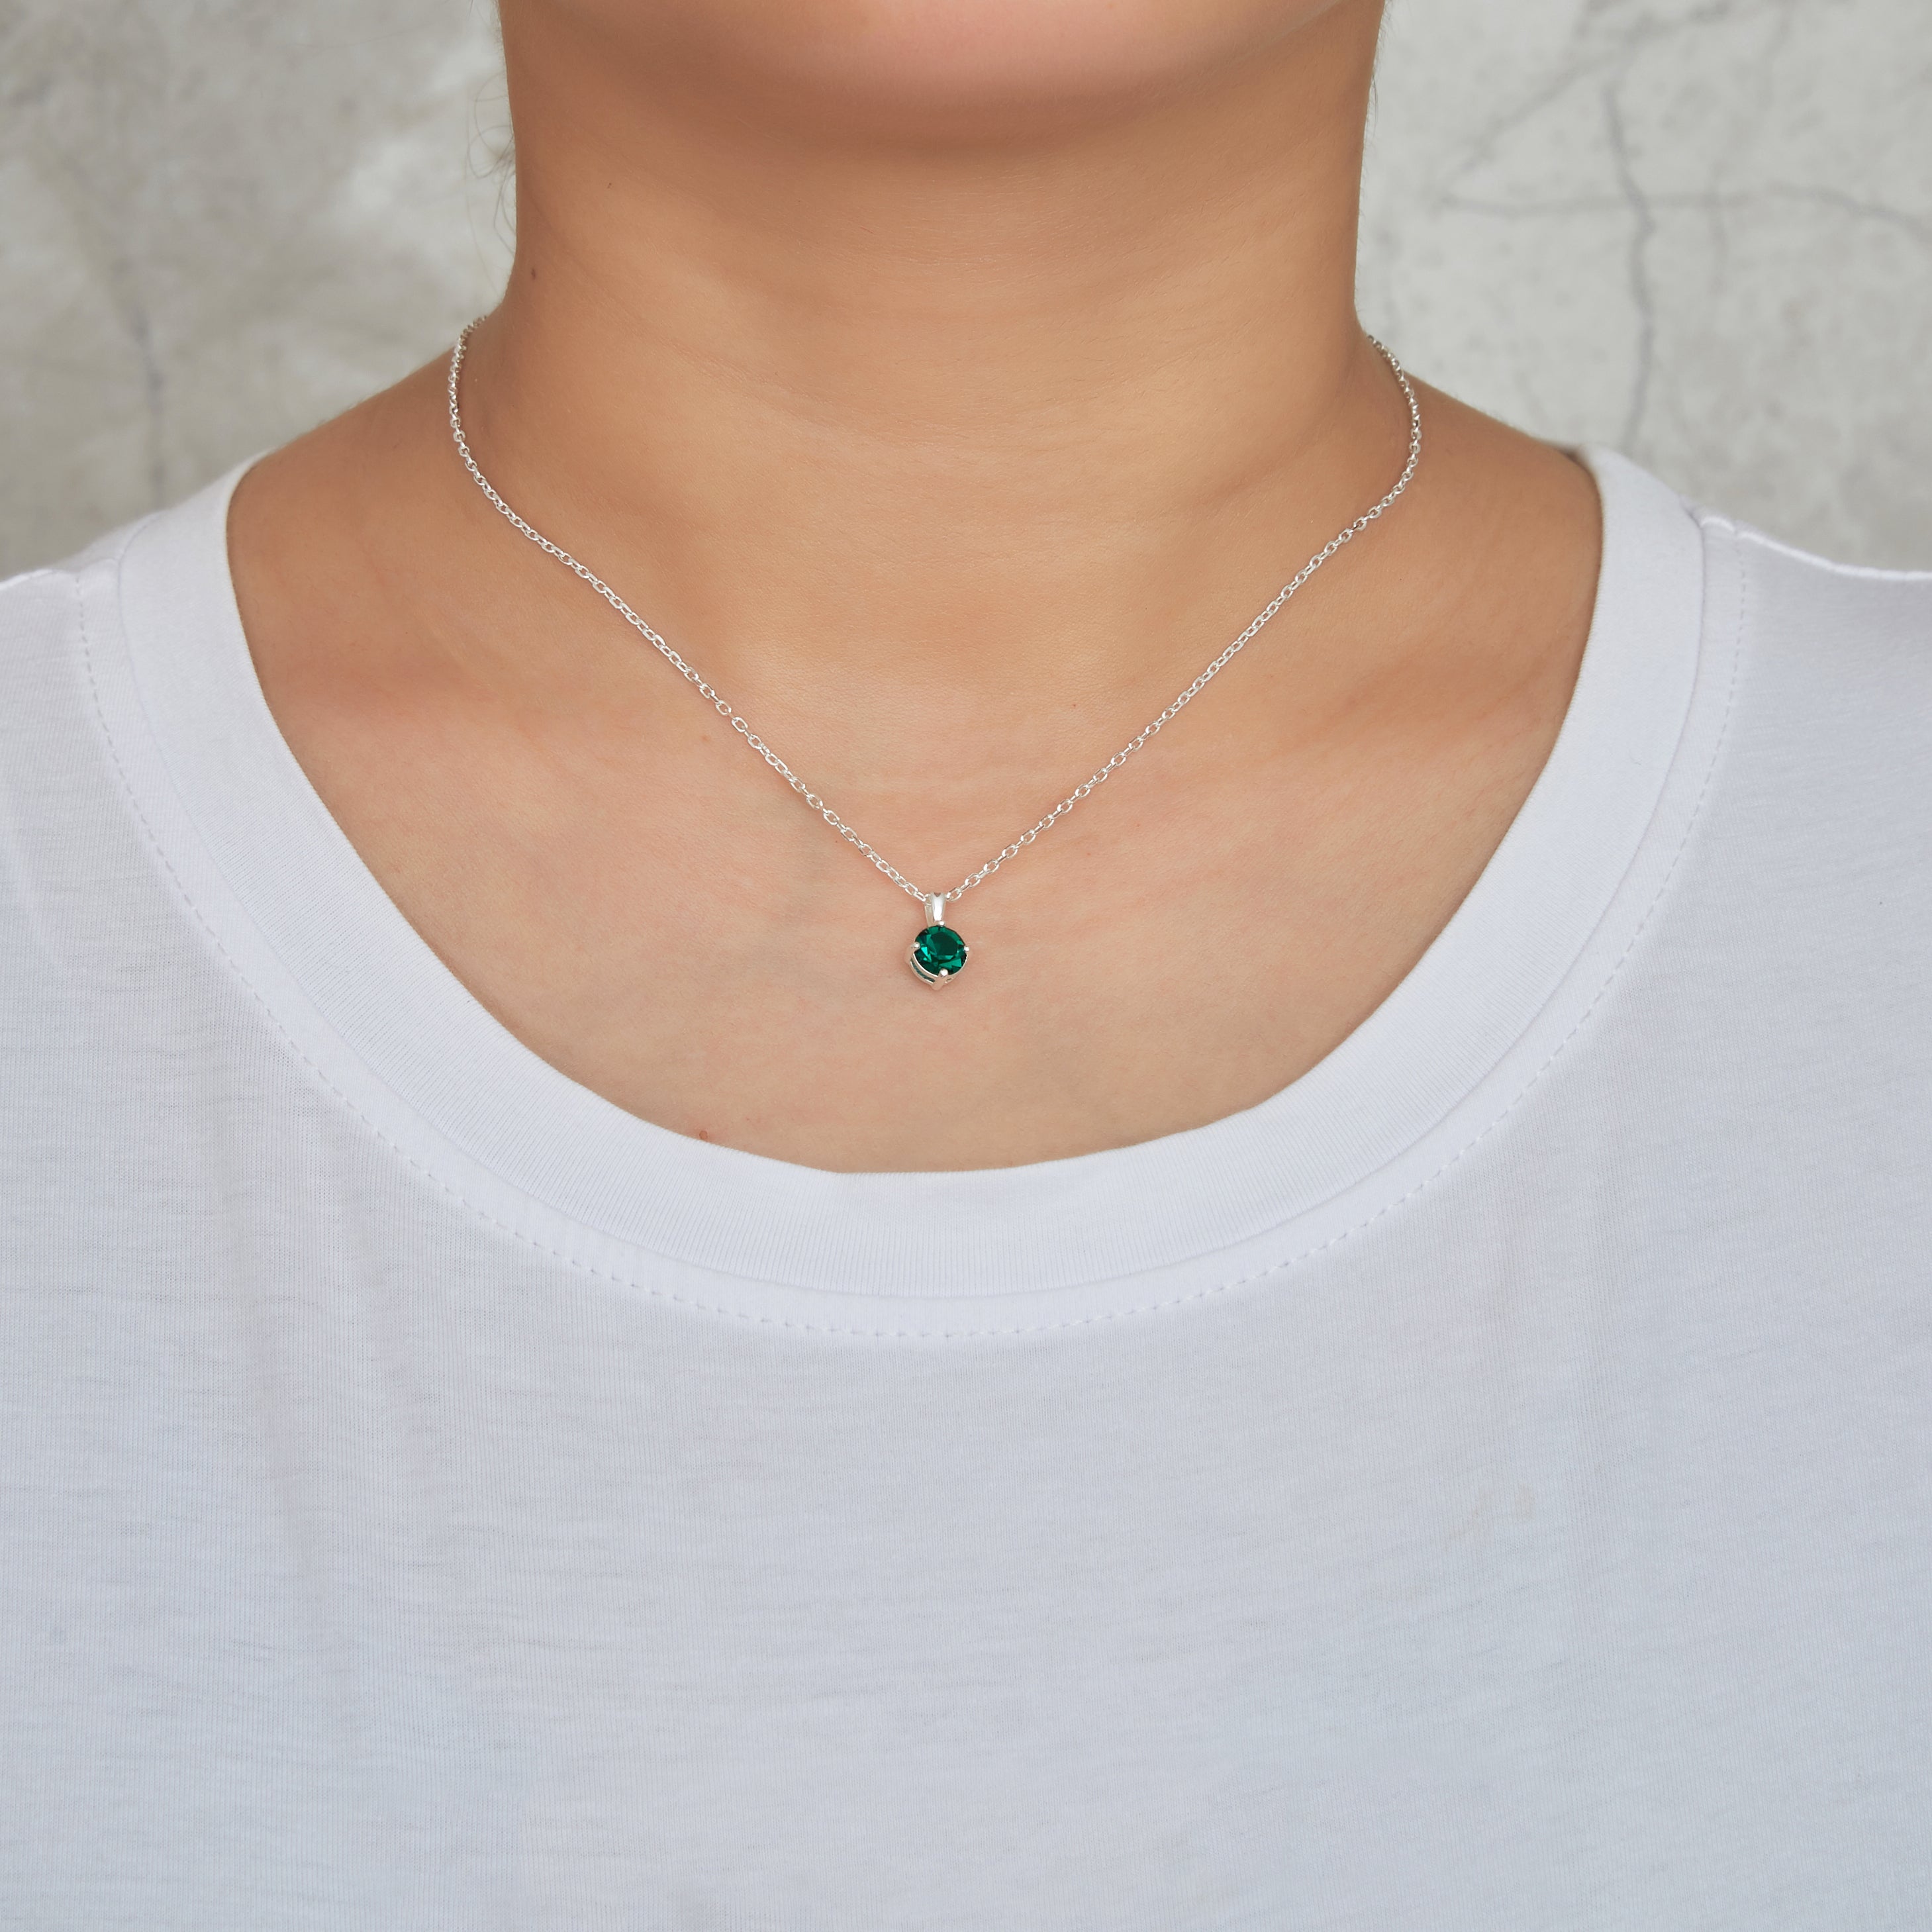 Sterling Silver May (Emerald) Birthstone Necklace & Earrings Set Created with Zircondia® Crystals